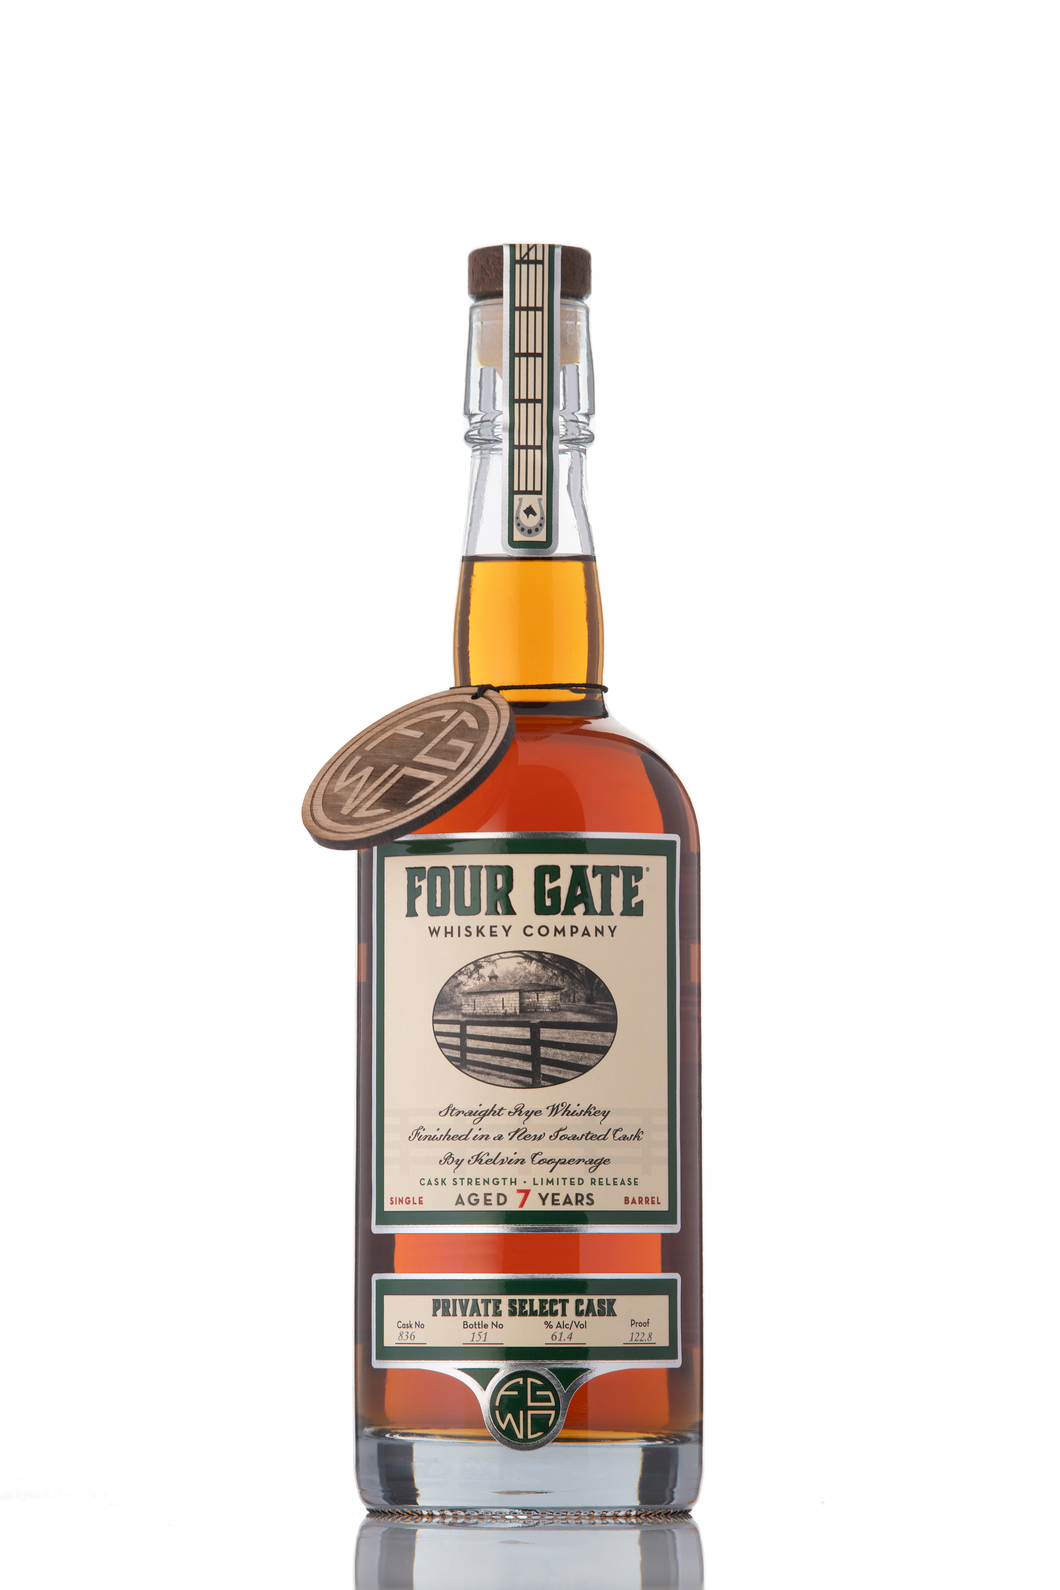 Four Gate Whiskey Company Single Barrel Rye Finished in New Toasted Cask By Kelvin Cooperage #836 122.8 proof - Selected by Seelbach's